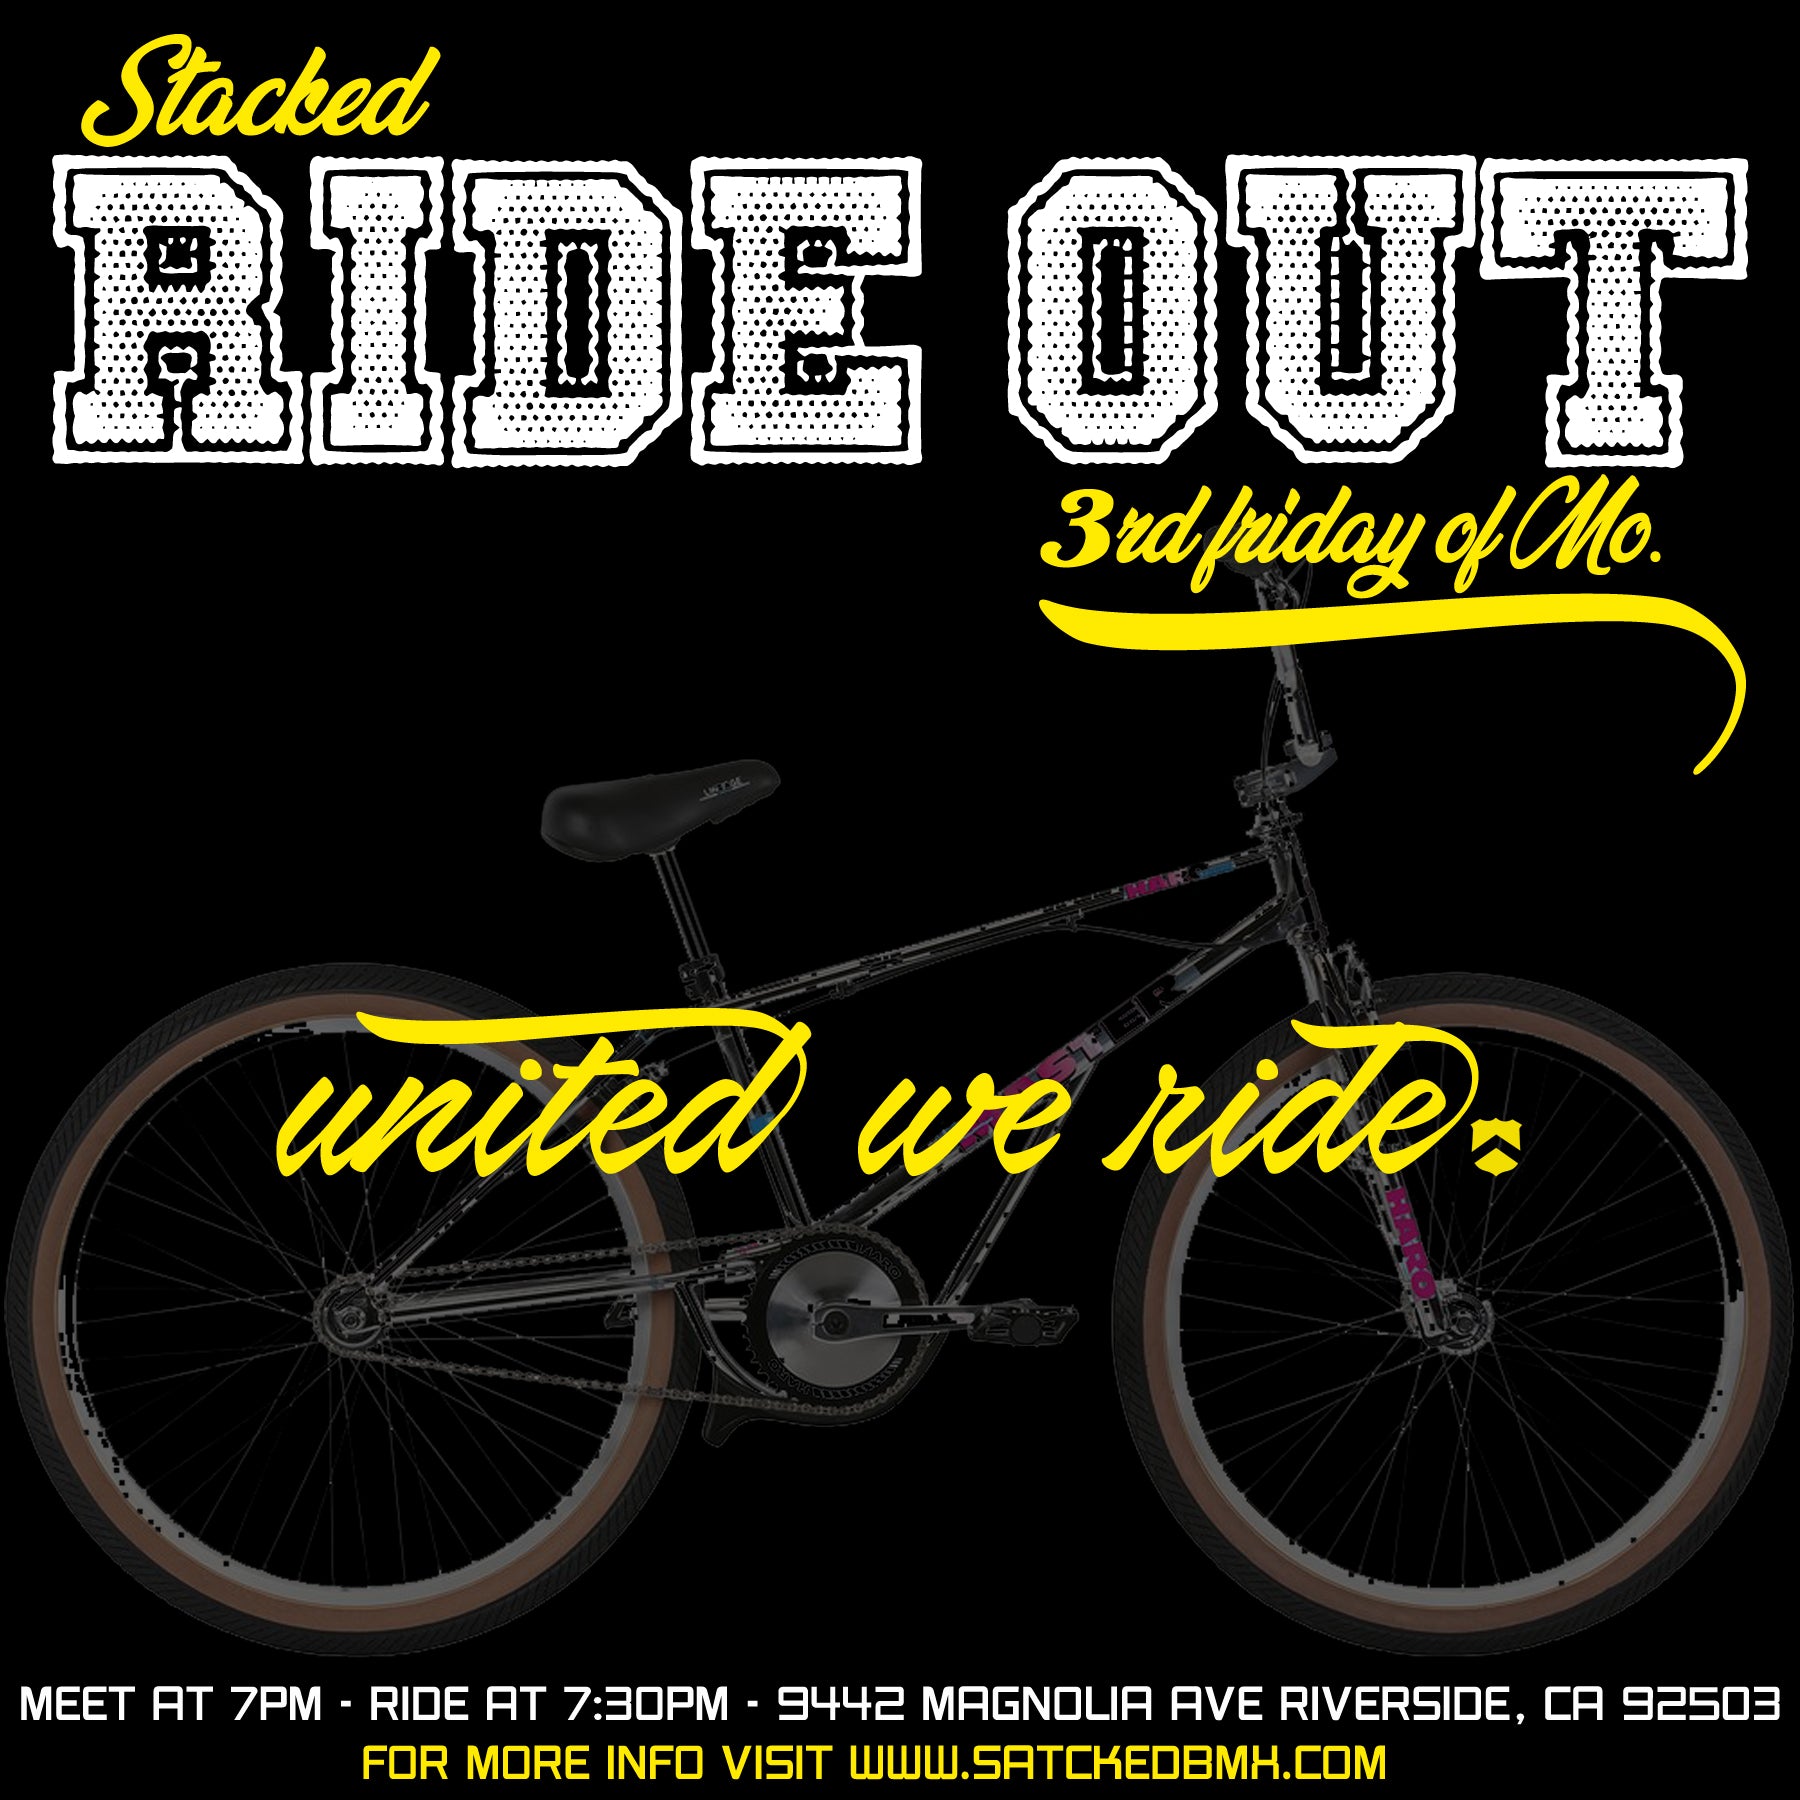 Stacked Ride out - at Stacked Bmx shop - July 19 at 7pm